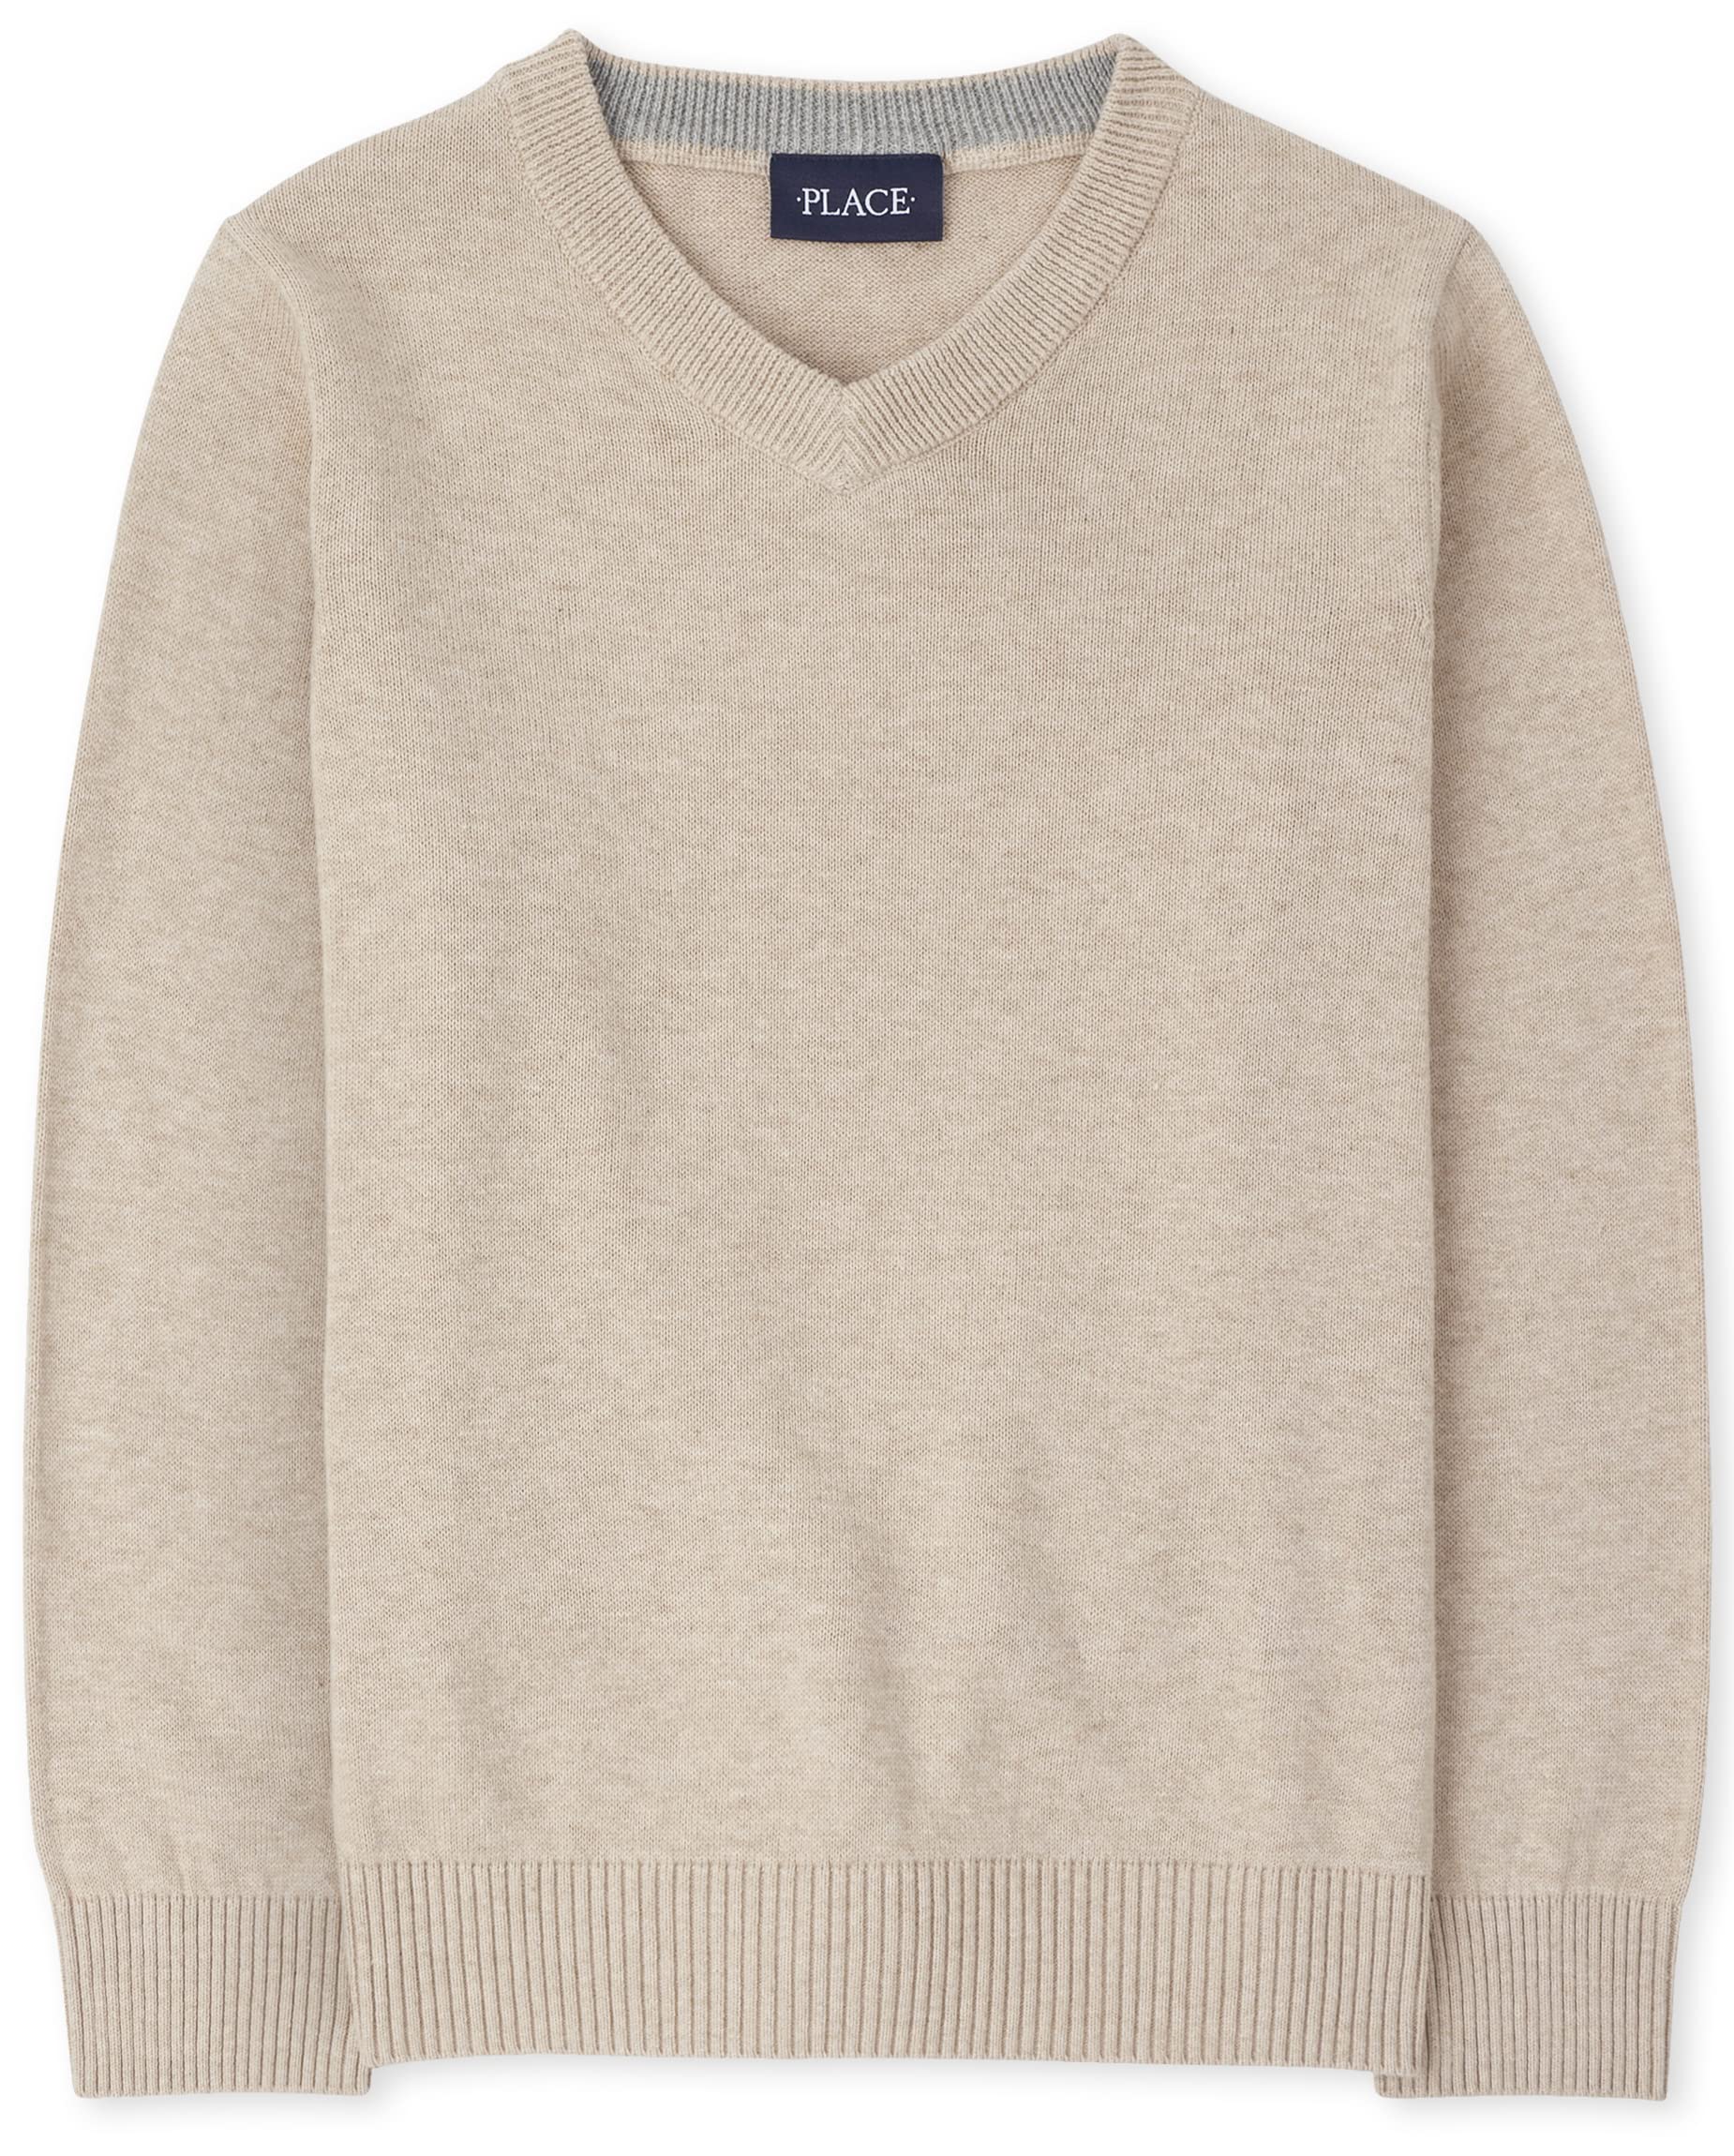 The Children's Place Boys' Long Sleeve Cotton V-Neck Sweater